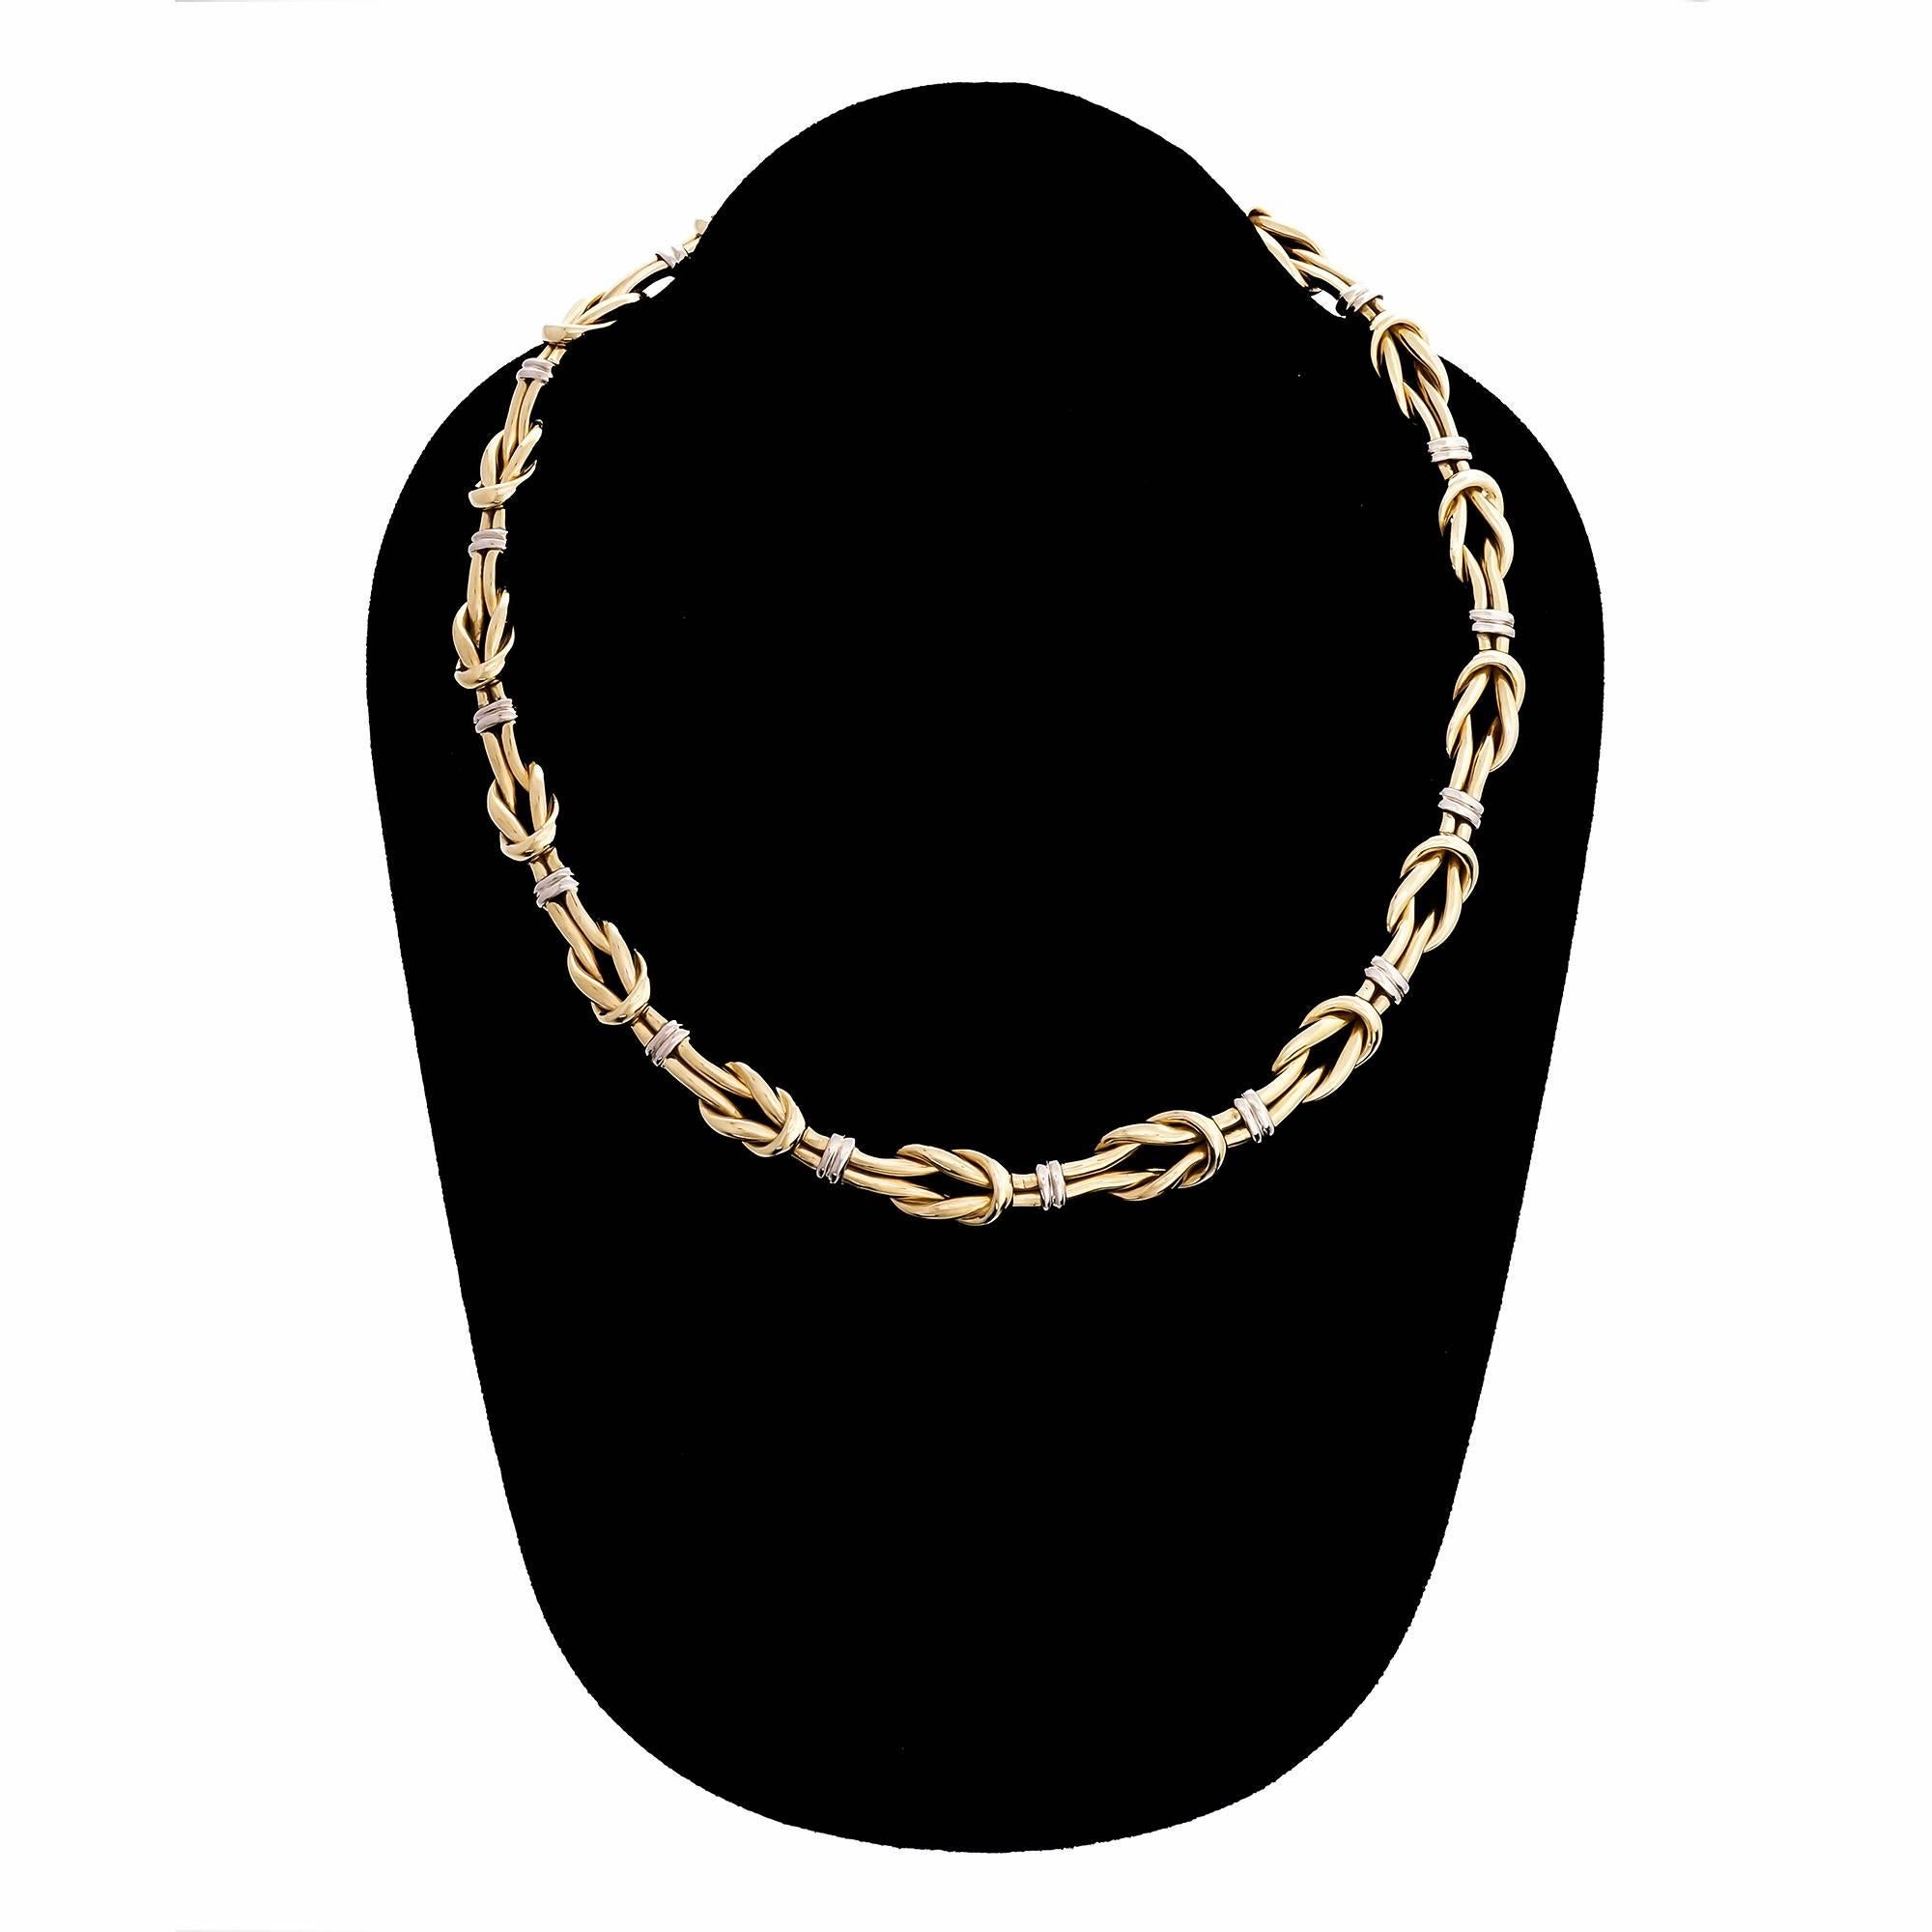 Vintage 1960s 18k yellow and white gold hinged link necklace, 16.5 inches long. Italian makers mark.

18k yellow and white gold
63.8 grams
Tested: 18k
Stamped: 750
Hallmark: N2633 Italy
Length: 16.5 inches – Width: 10.54mm – Depth: 4.66mm



